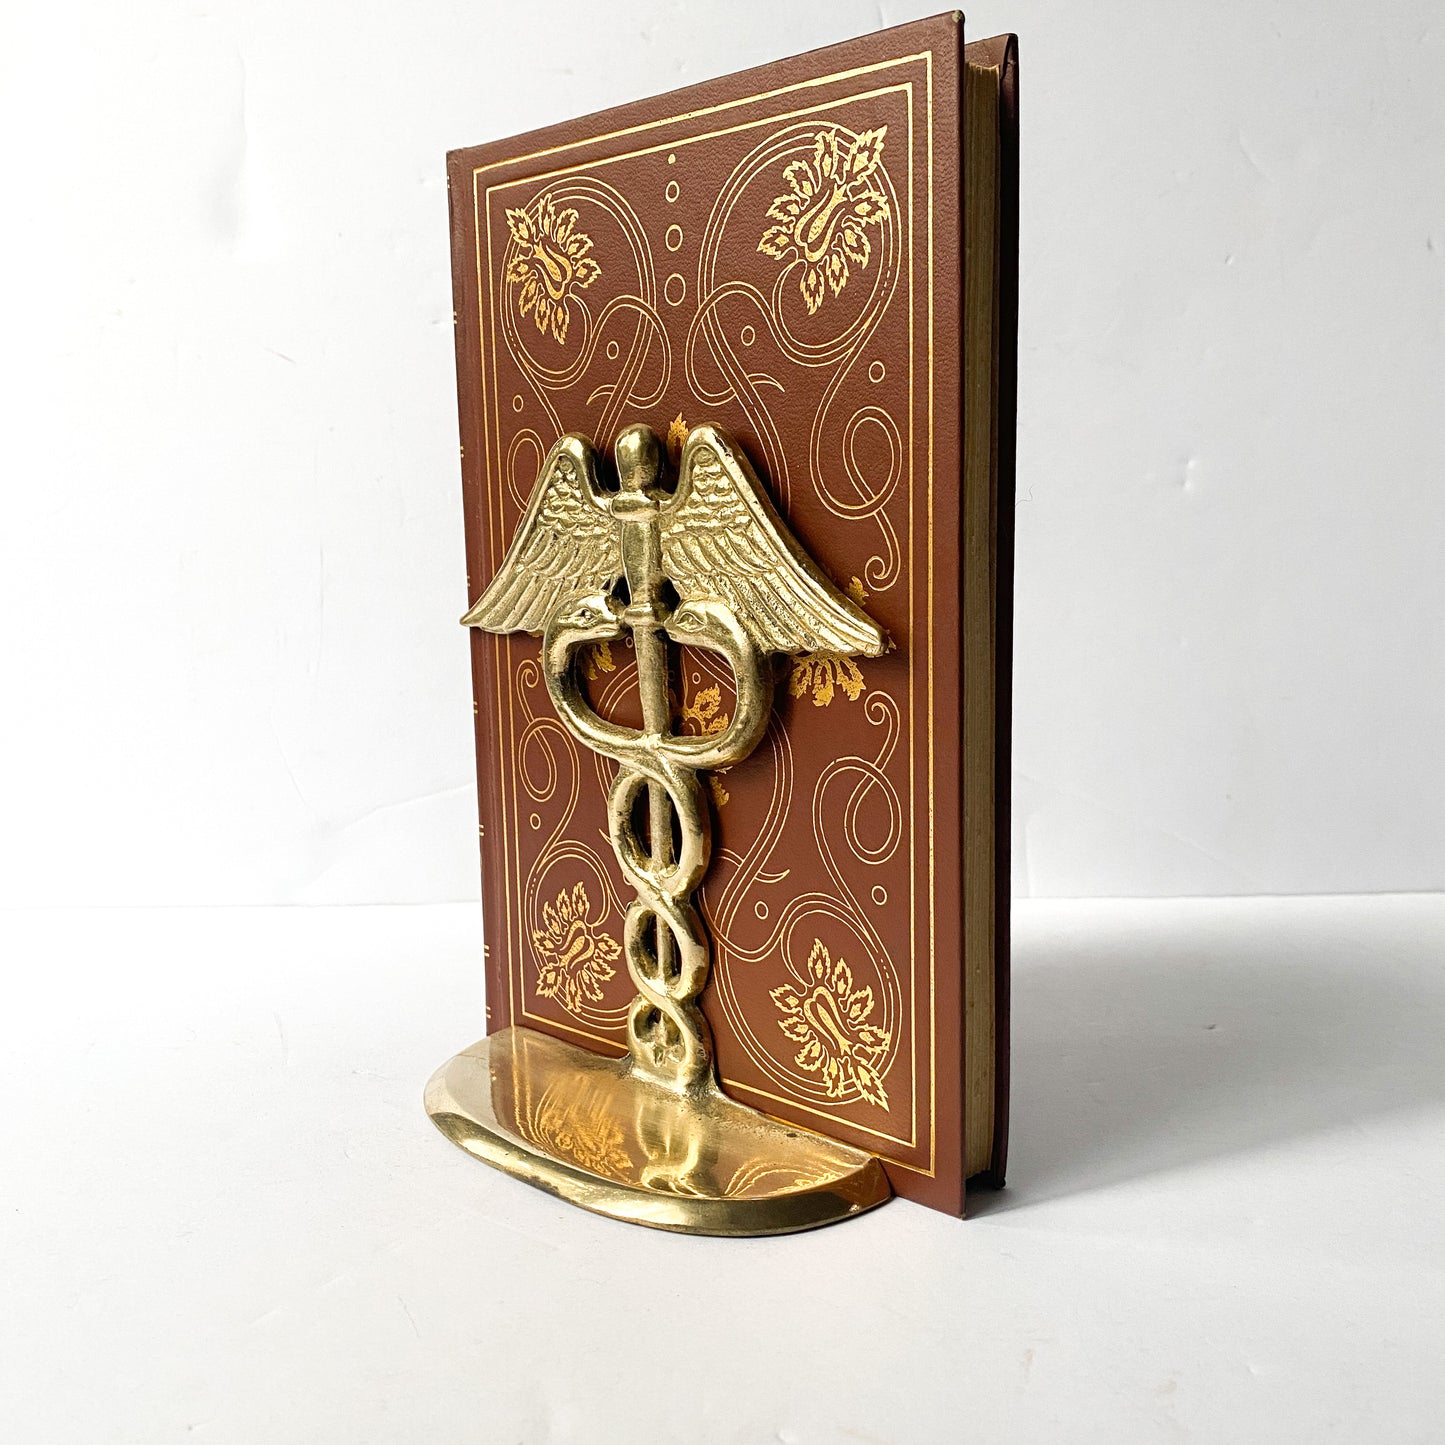 Vintage Brass Caduceus bookends, Intertwined Snake Decor